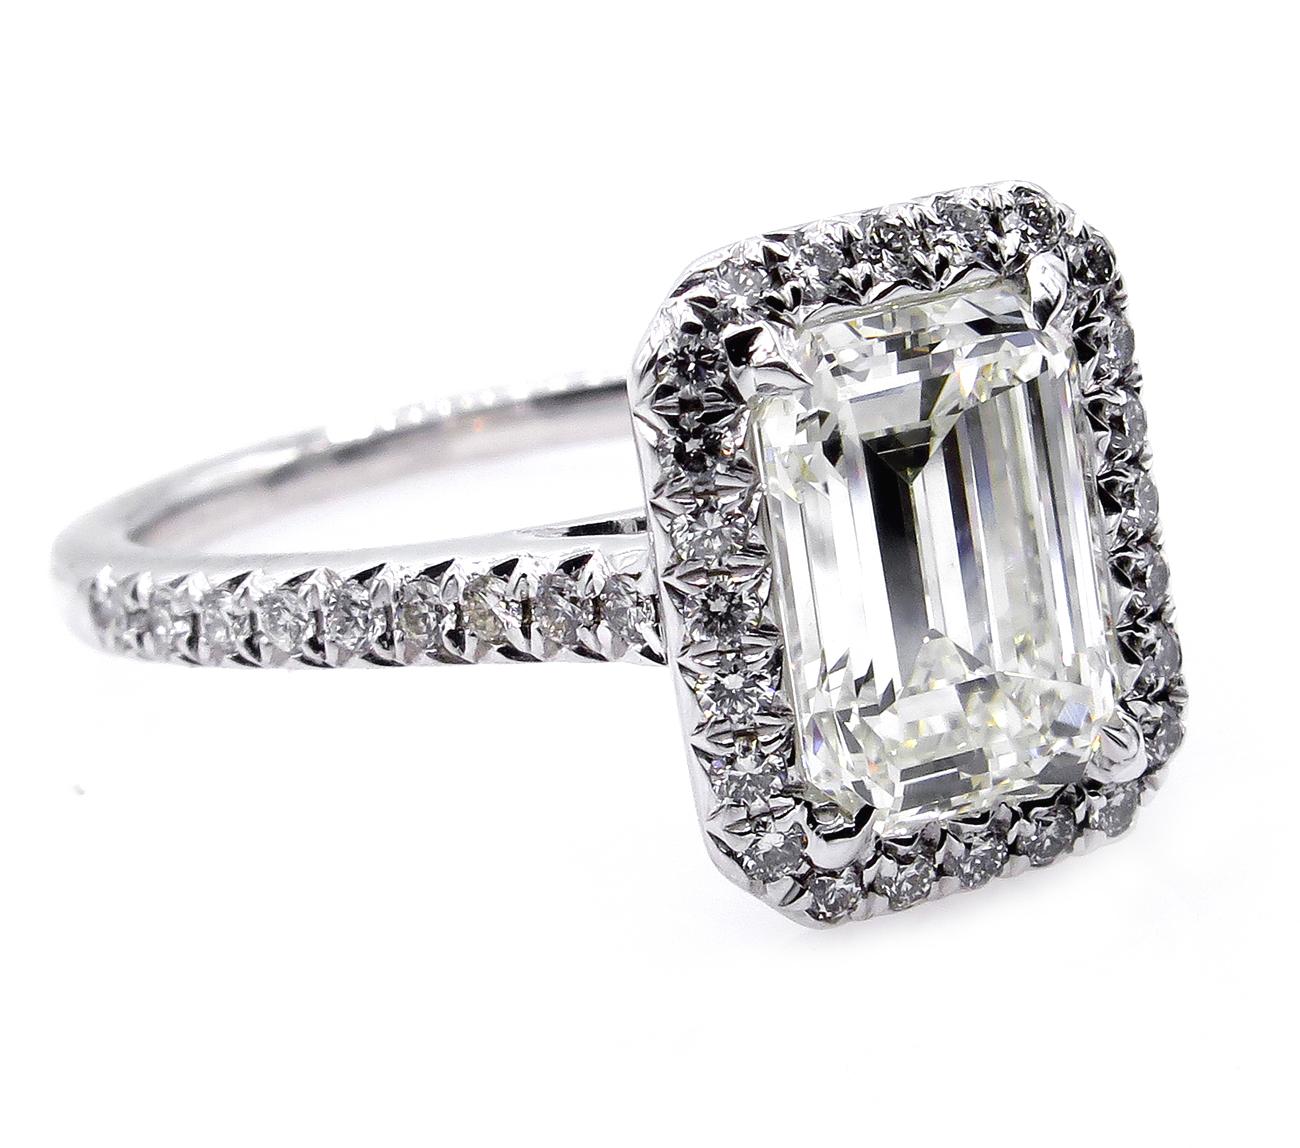 This ESTATE ring will take your breath away! Great opportunity to own a 100% NATURAL NONE-treated , Great Quality diamond for an exceptional price!
Buy her this exquisite and the most classic, elegant diamond ring which will go beyond her